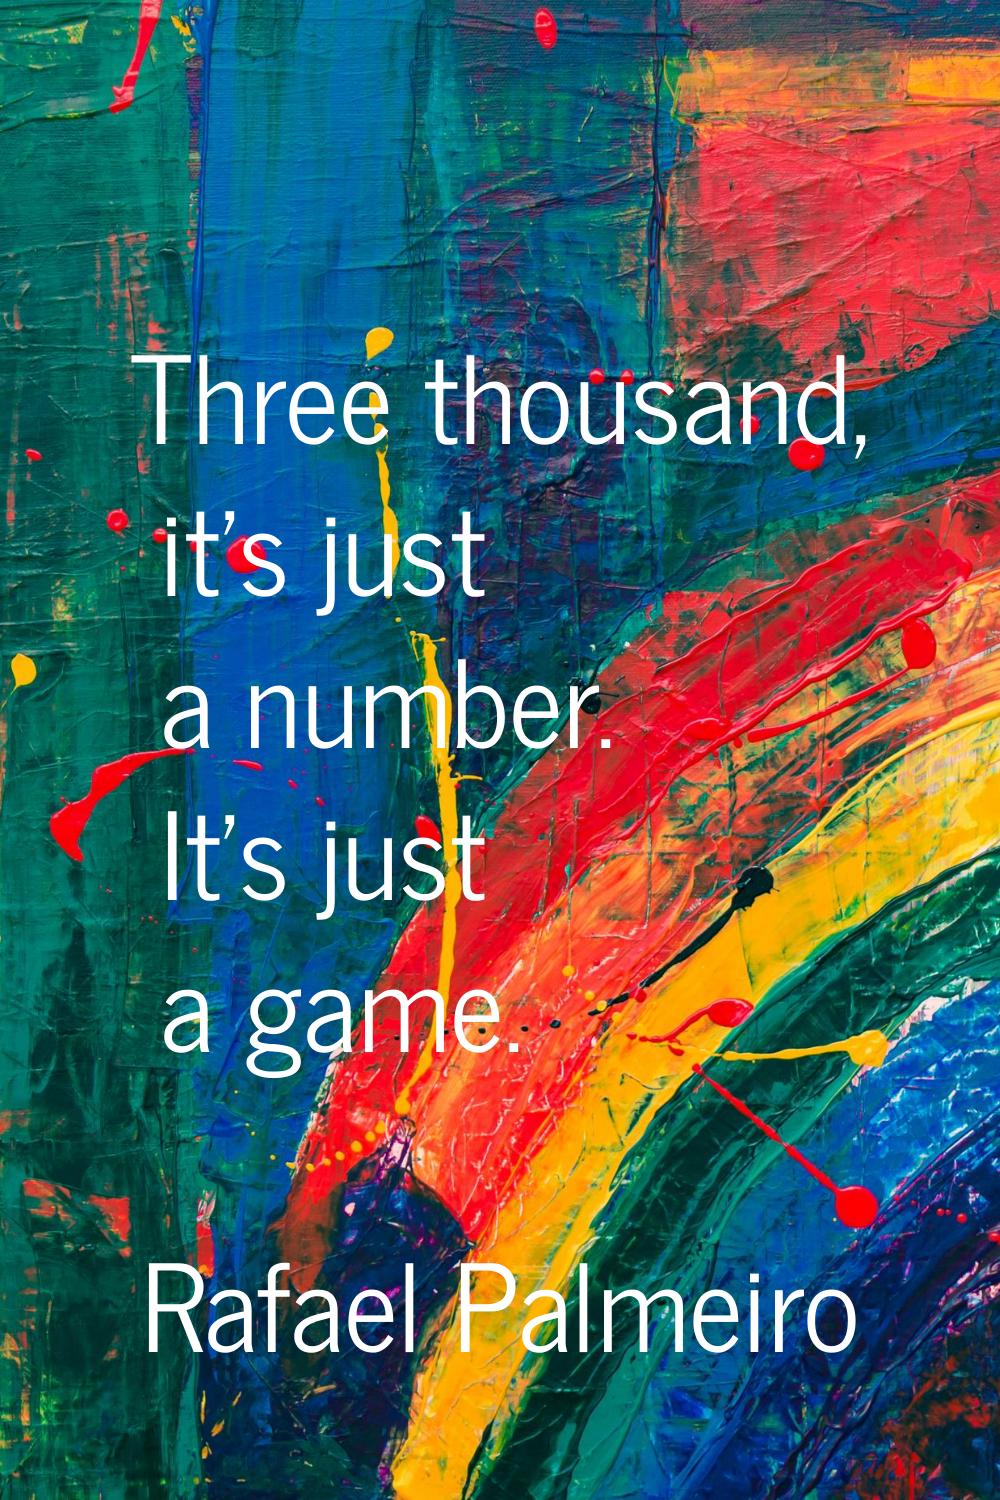 Three thousand, it's just a number. It's just a game.